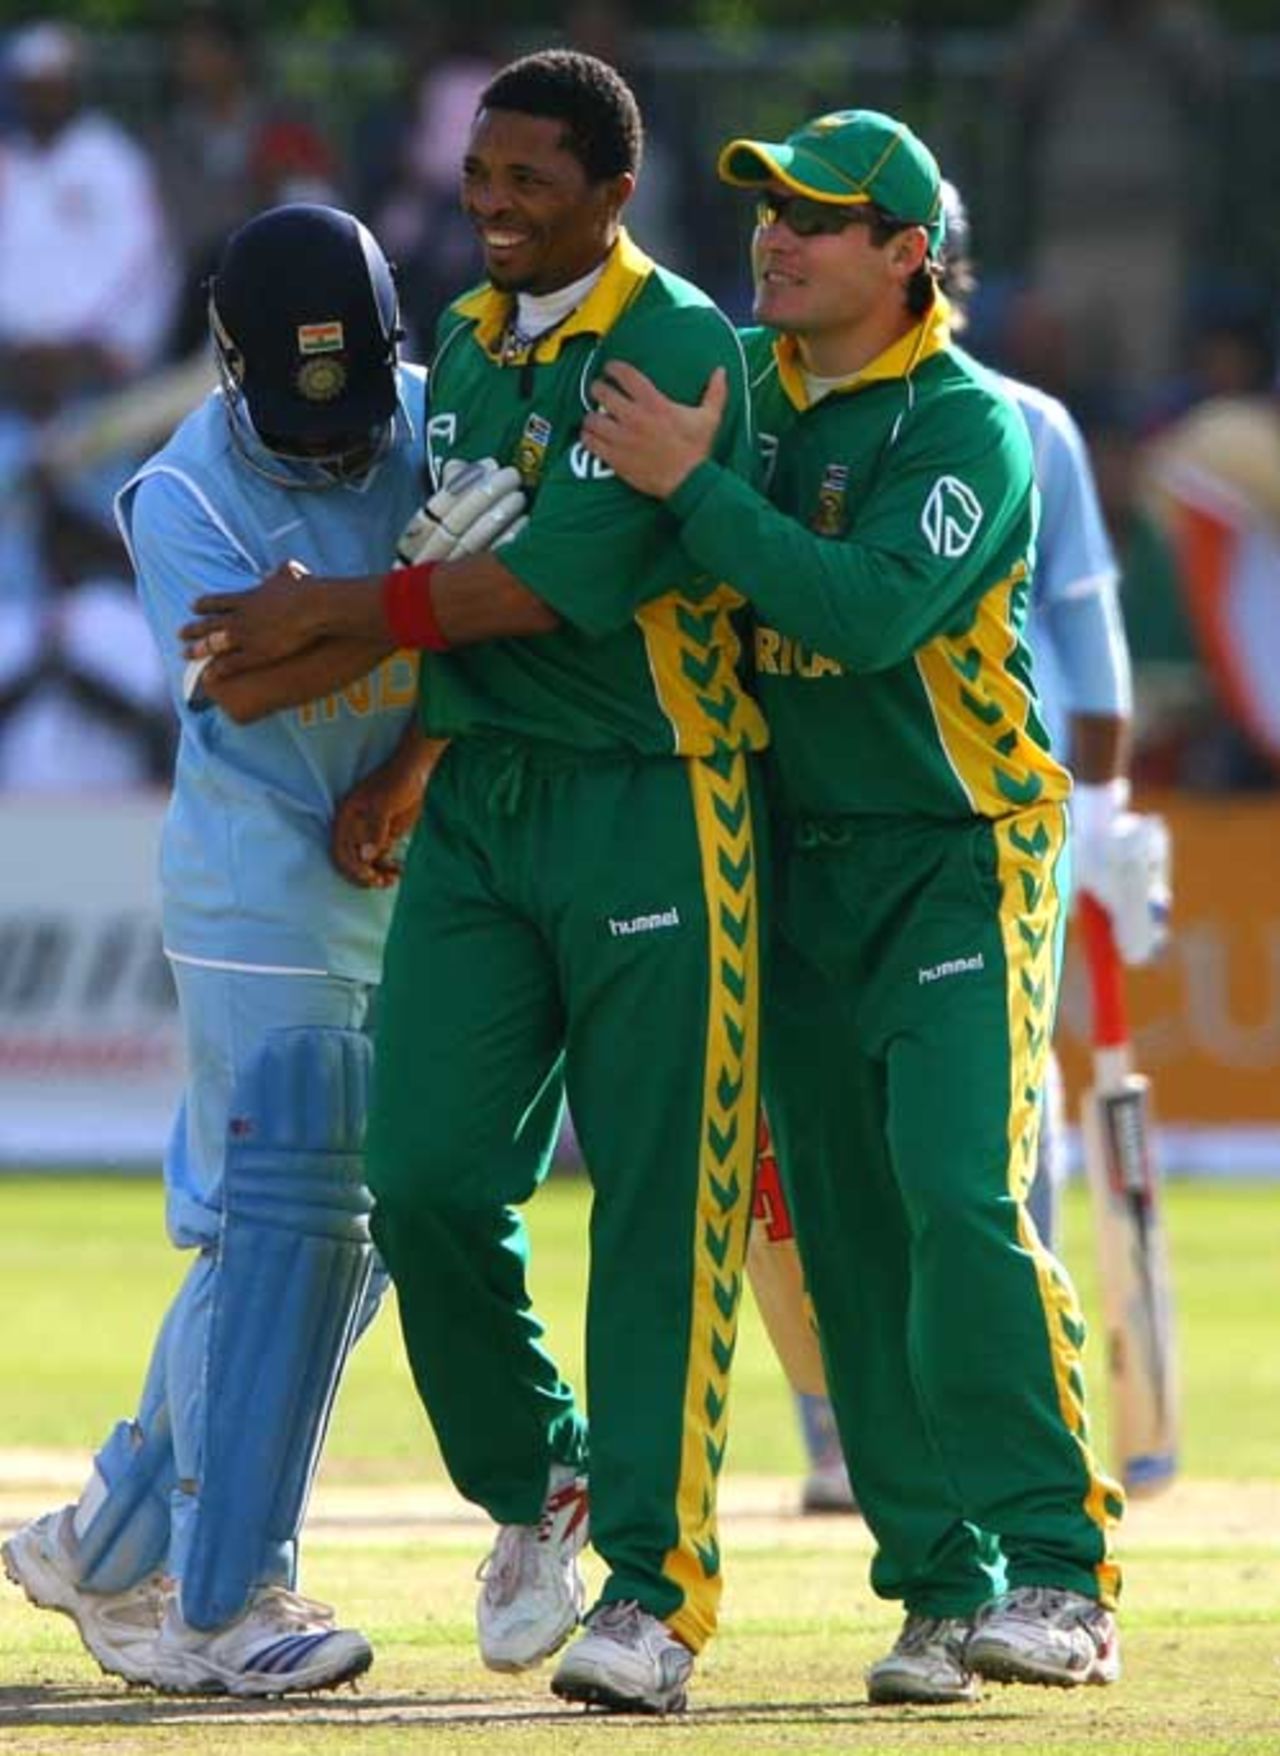 Makhaya Ntini is congratulated by Morne Van Wyk after dismissing Sachin Tendulkar early, India v South Africa, 3rd ODI, Belfast, July 1, 2007